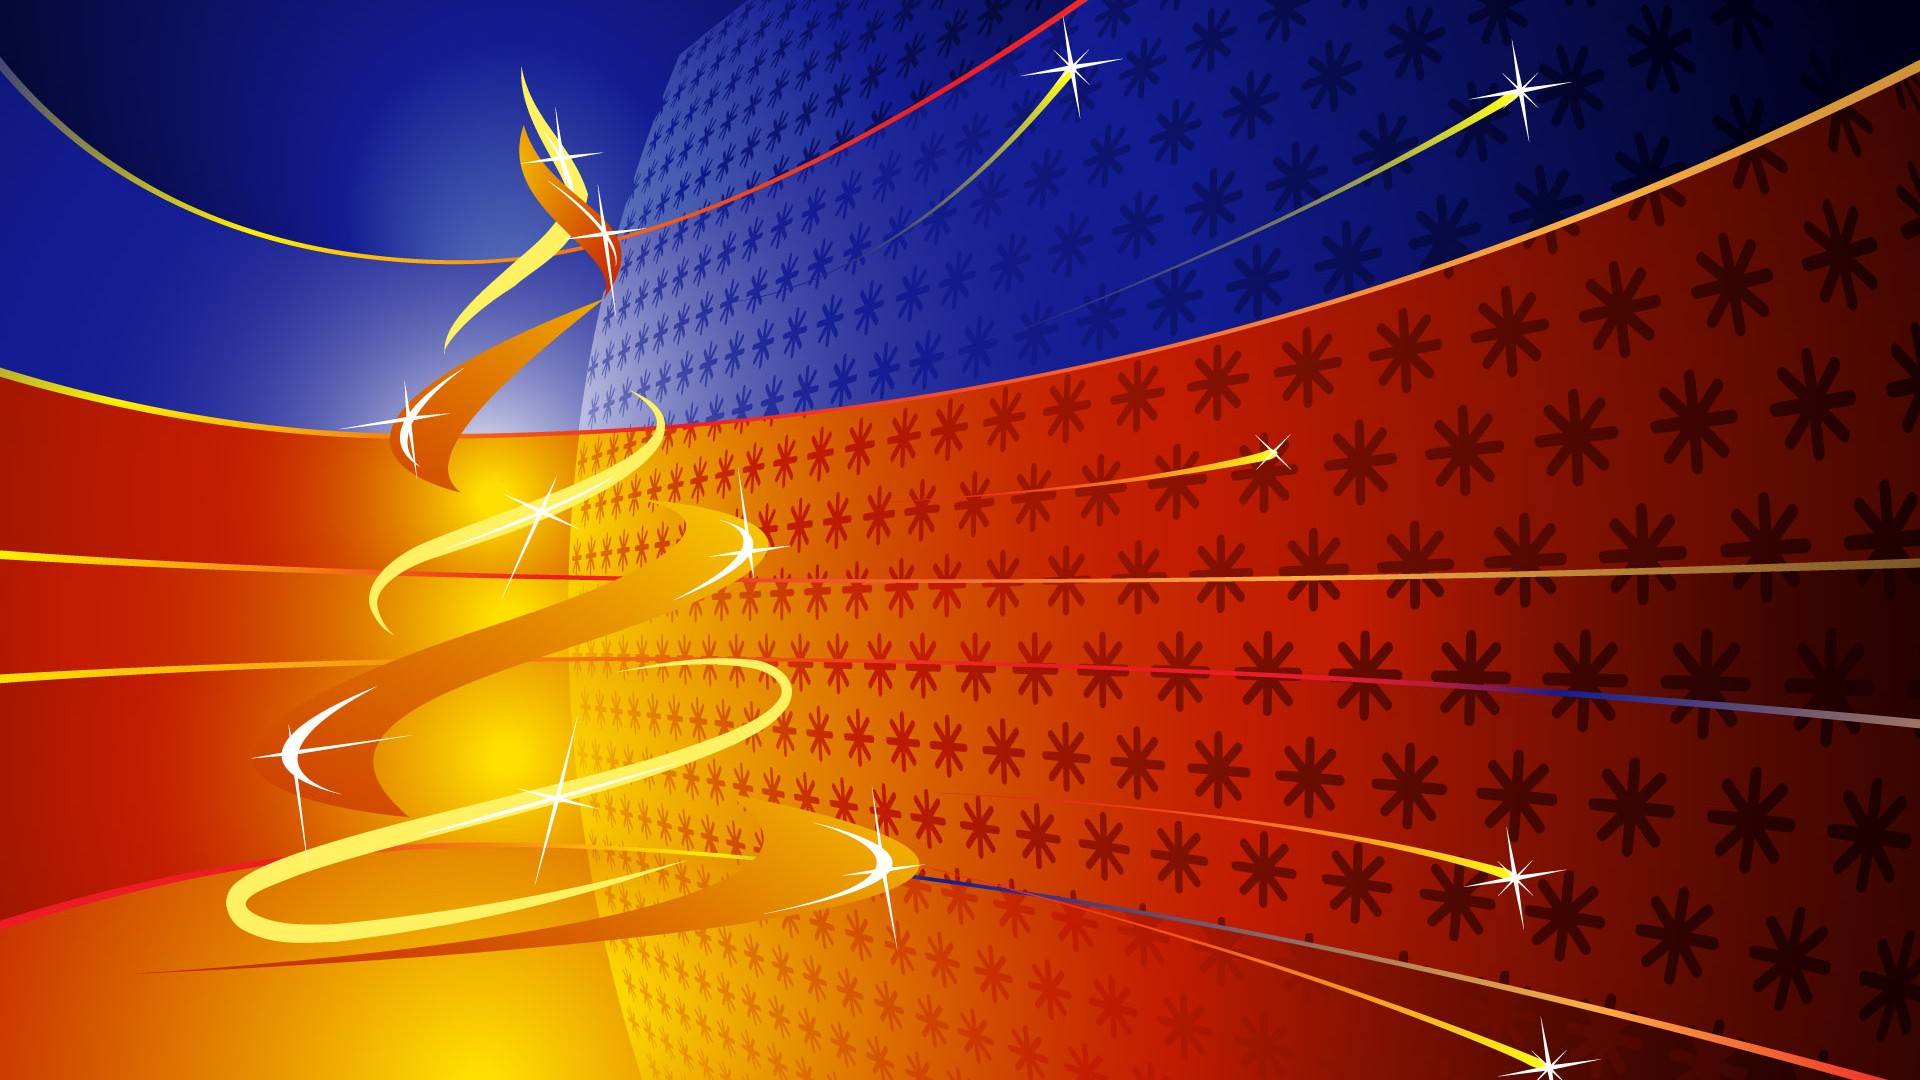 Exquisite Christmas Theme HD Wallpapers #40 - 1920x1080